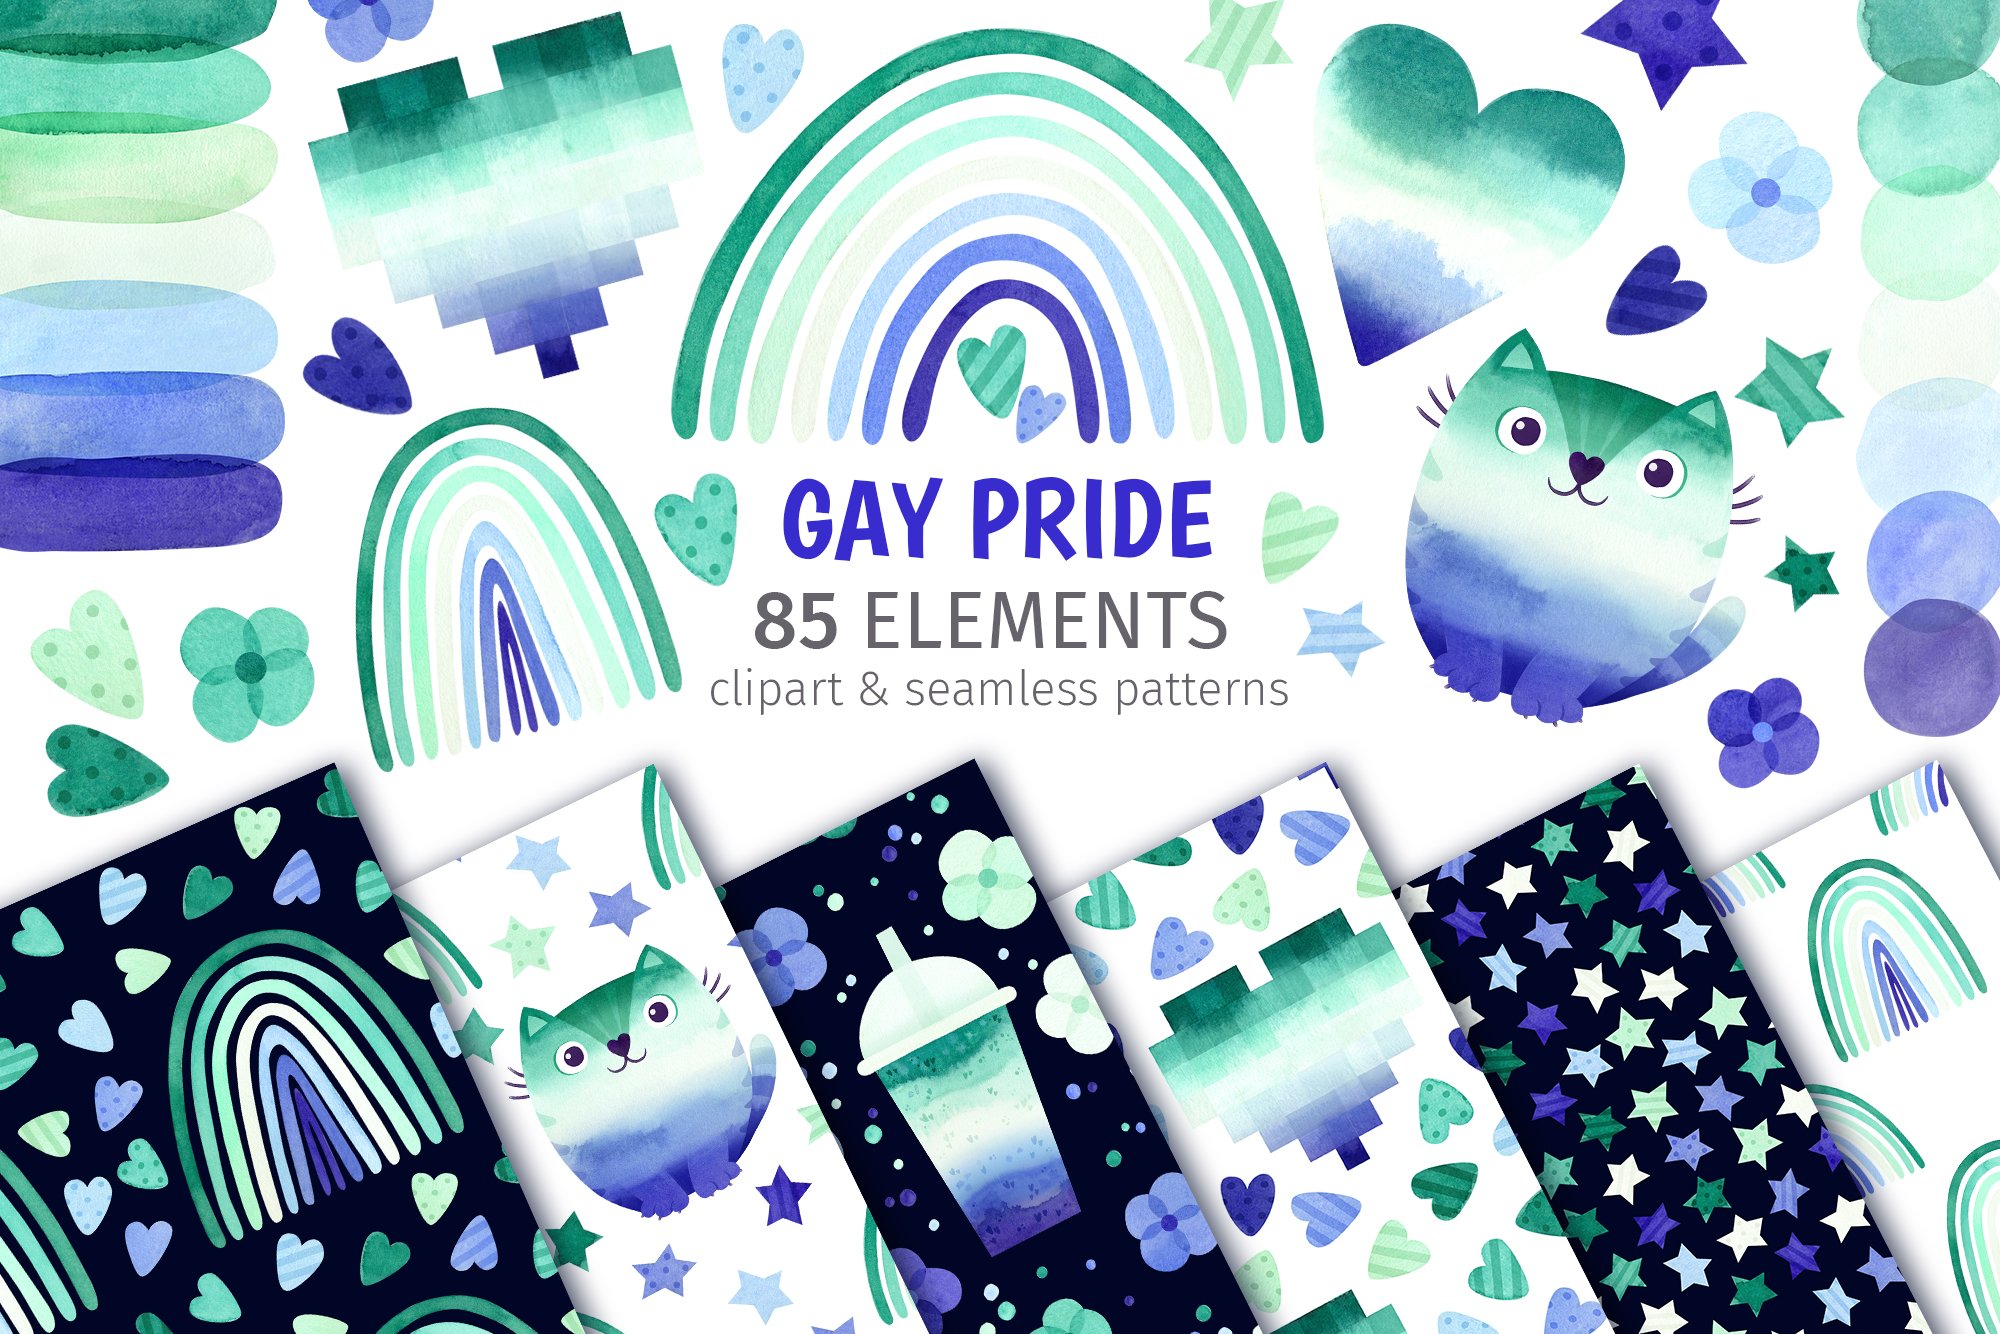 Gay pride clipart and patterns cover image.